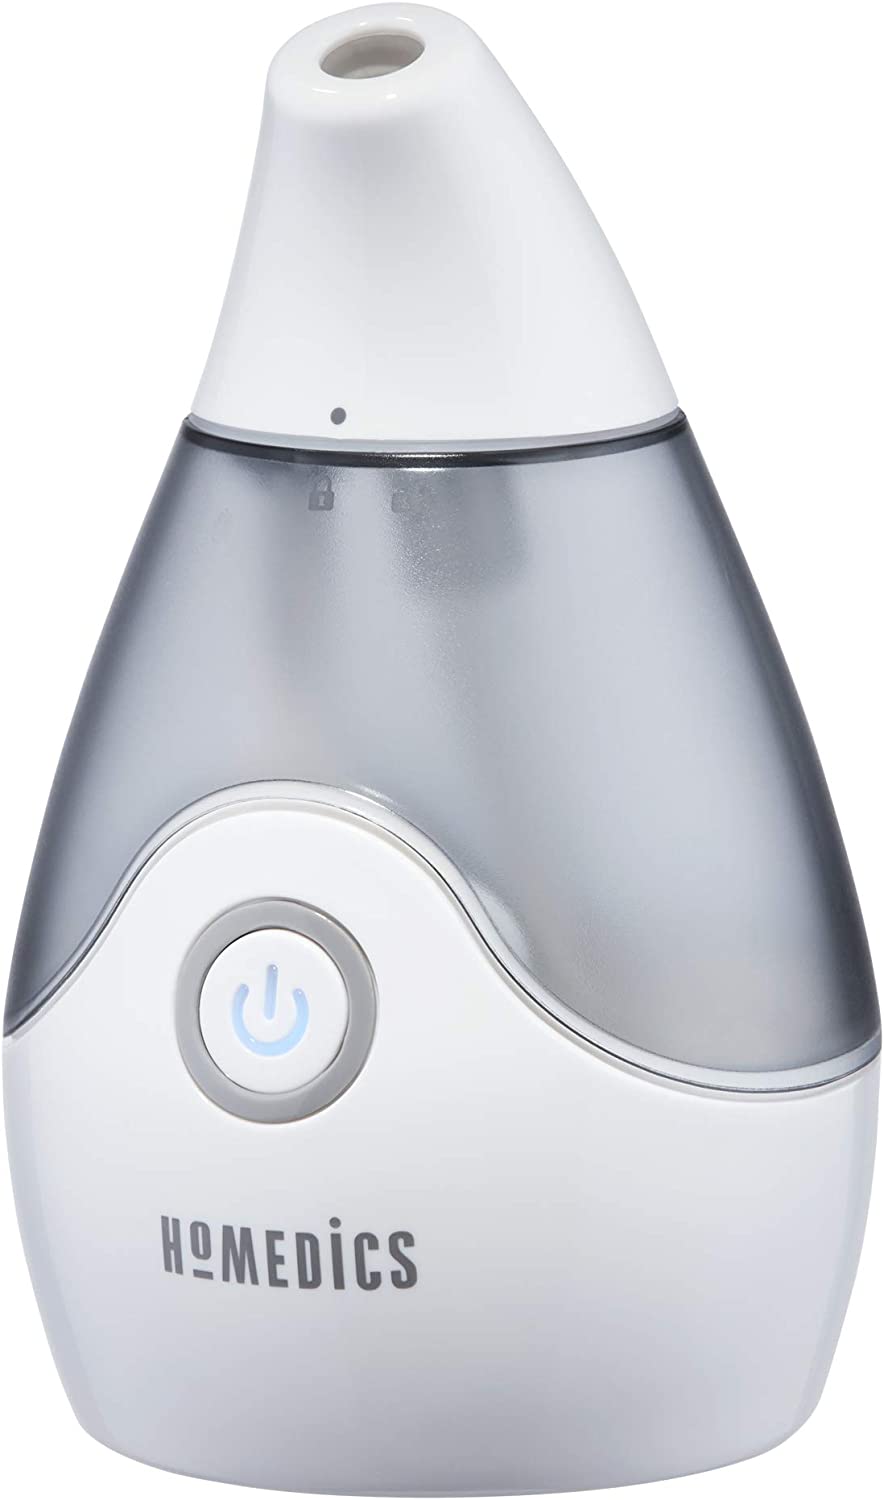 Replacement Parts for Homedics Humidifiers